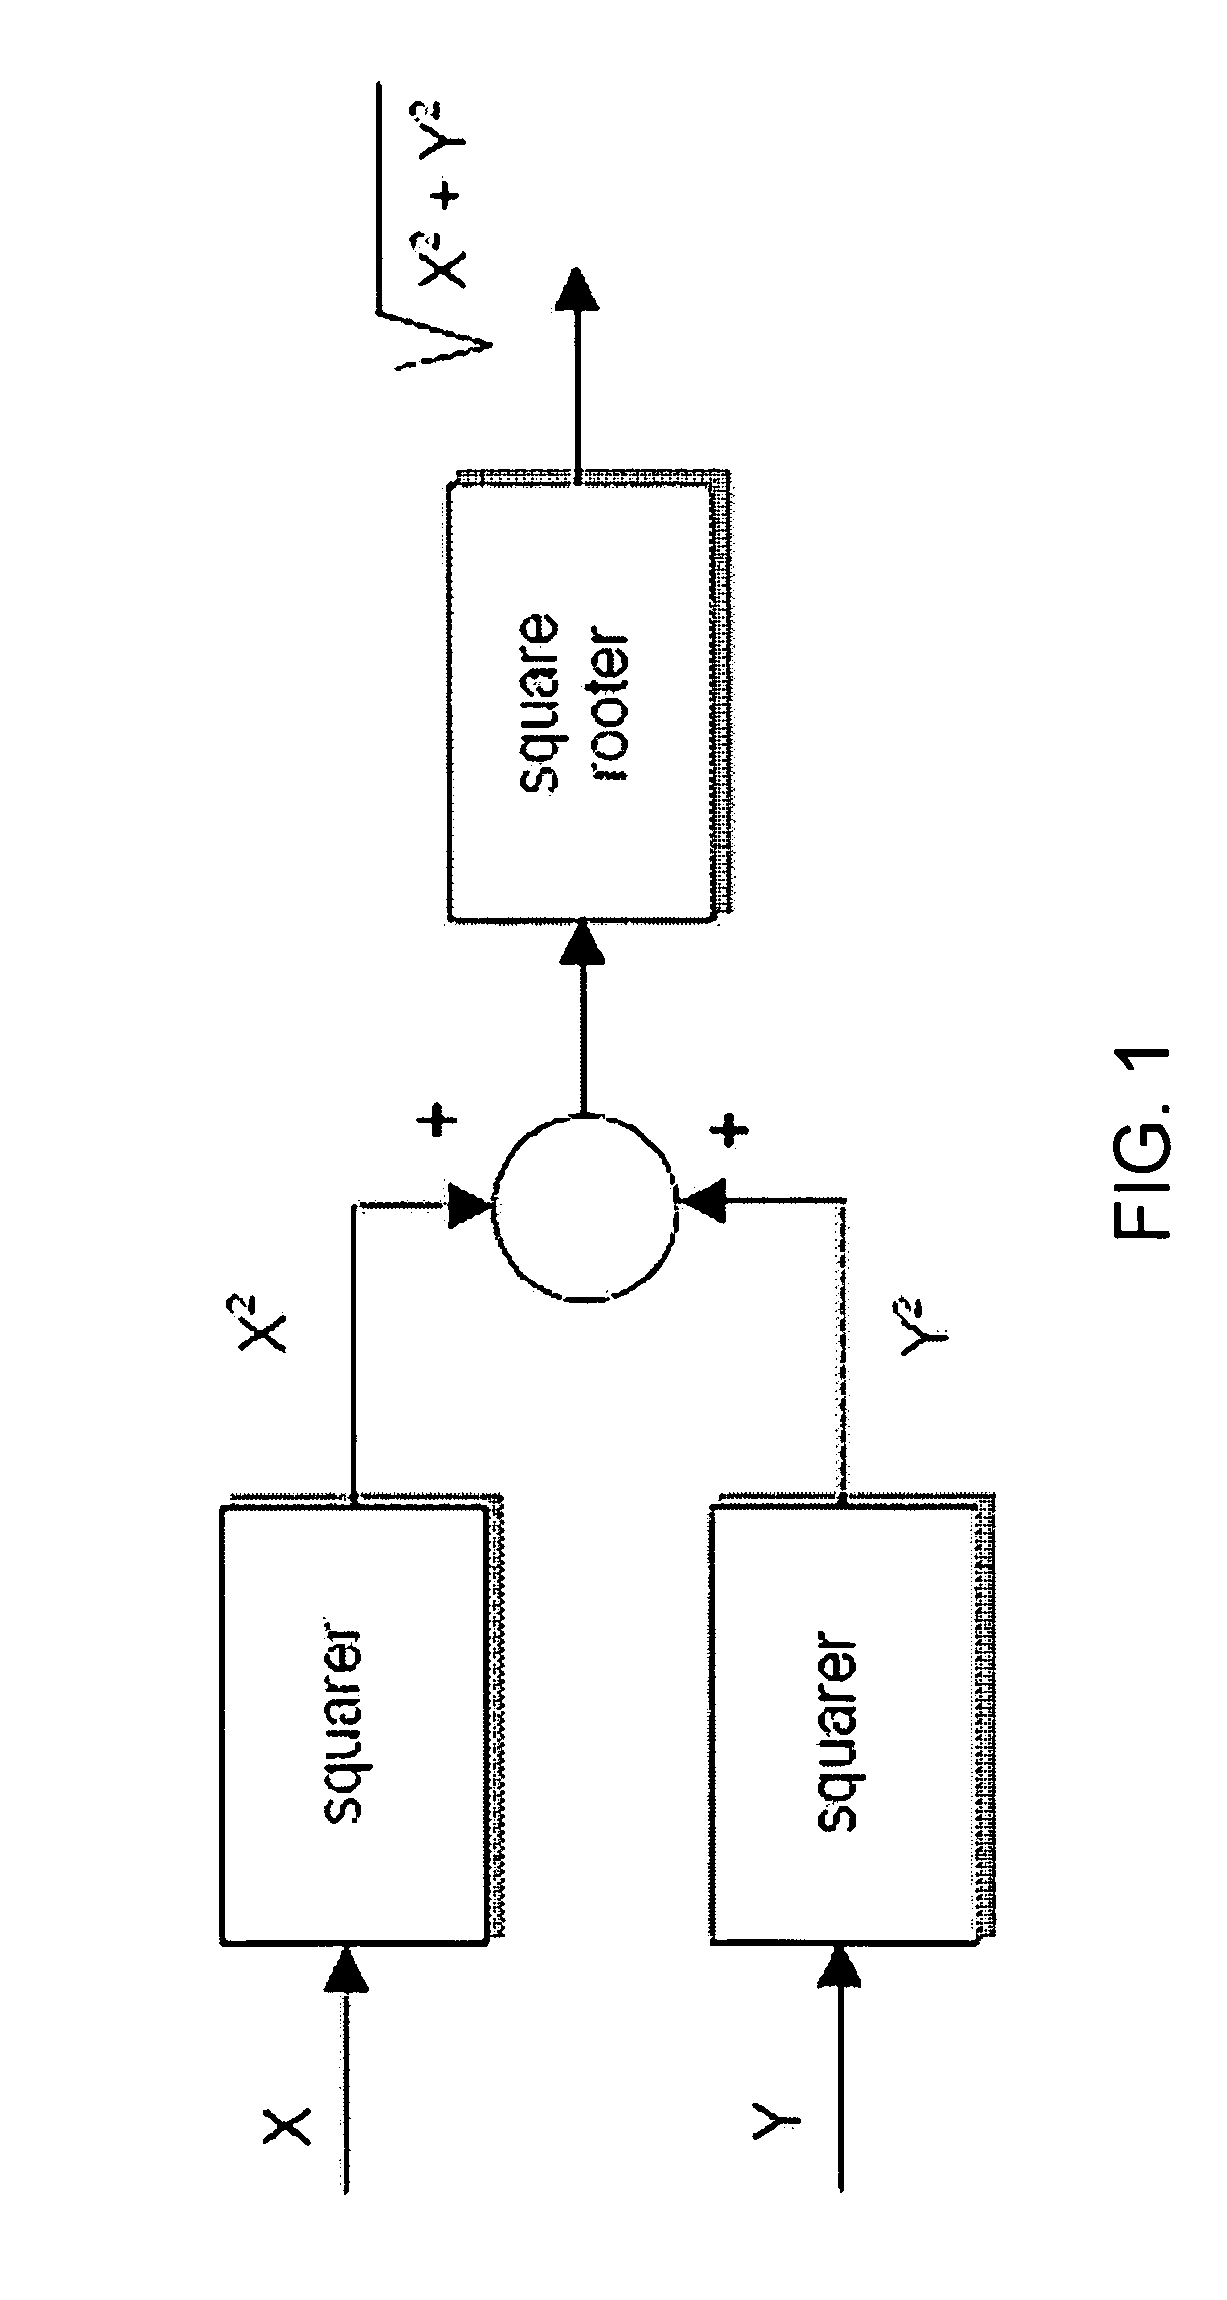 Apparatus for low cost lightning detection